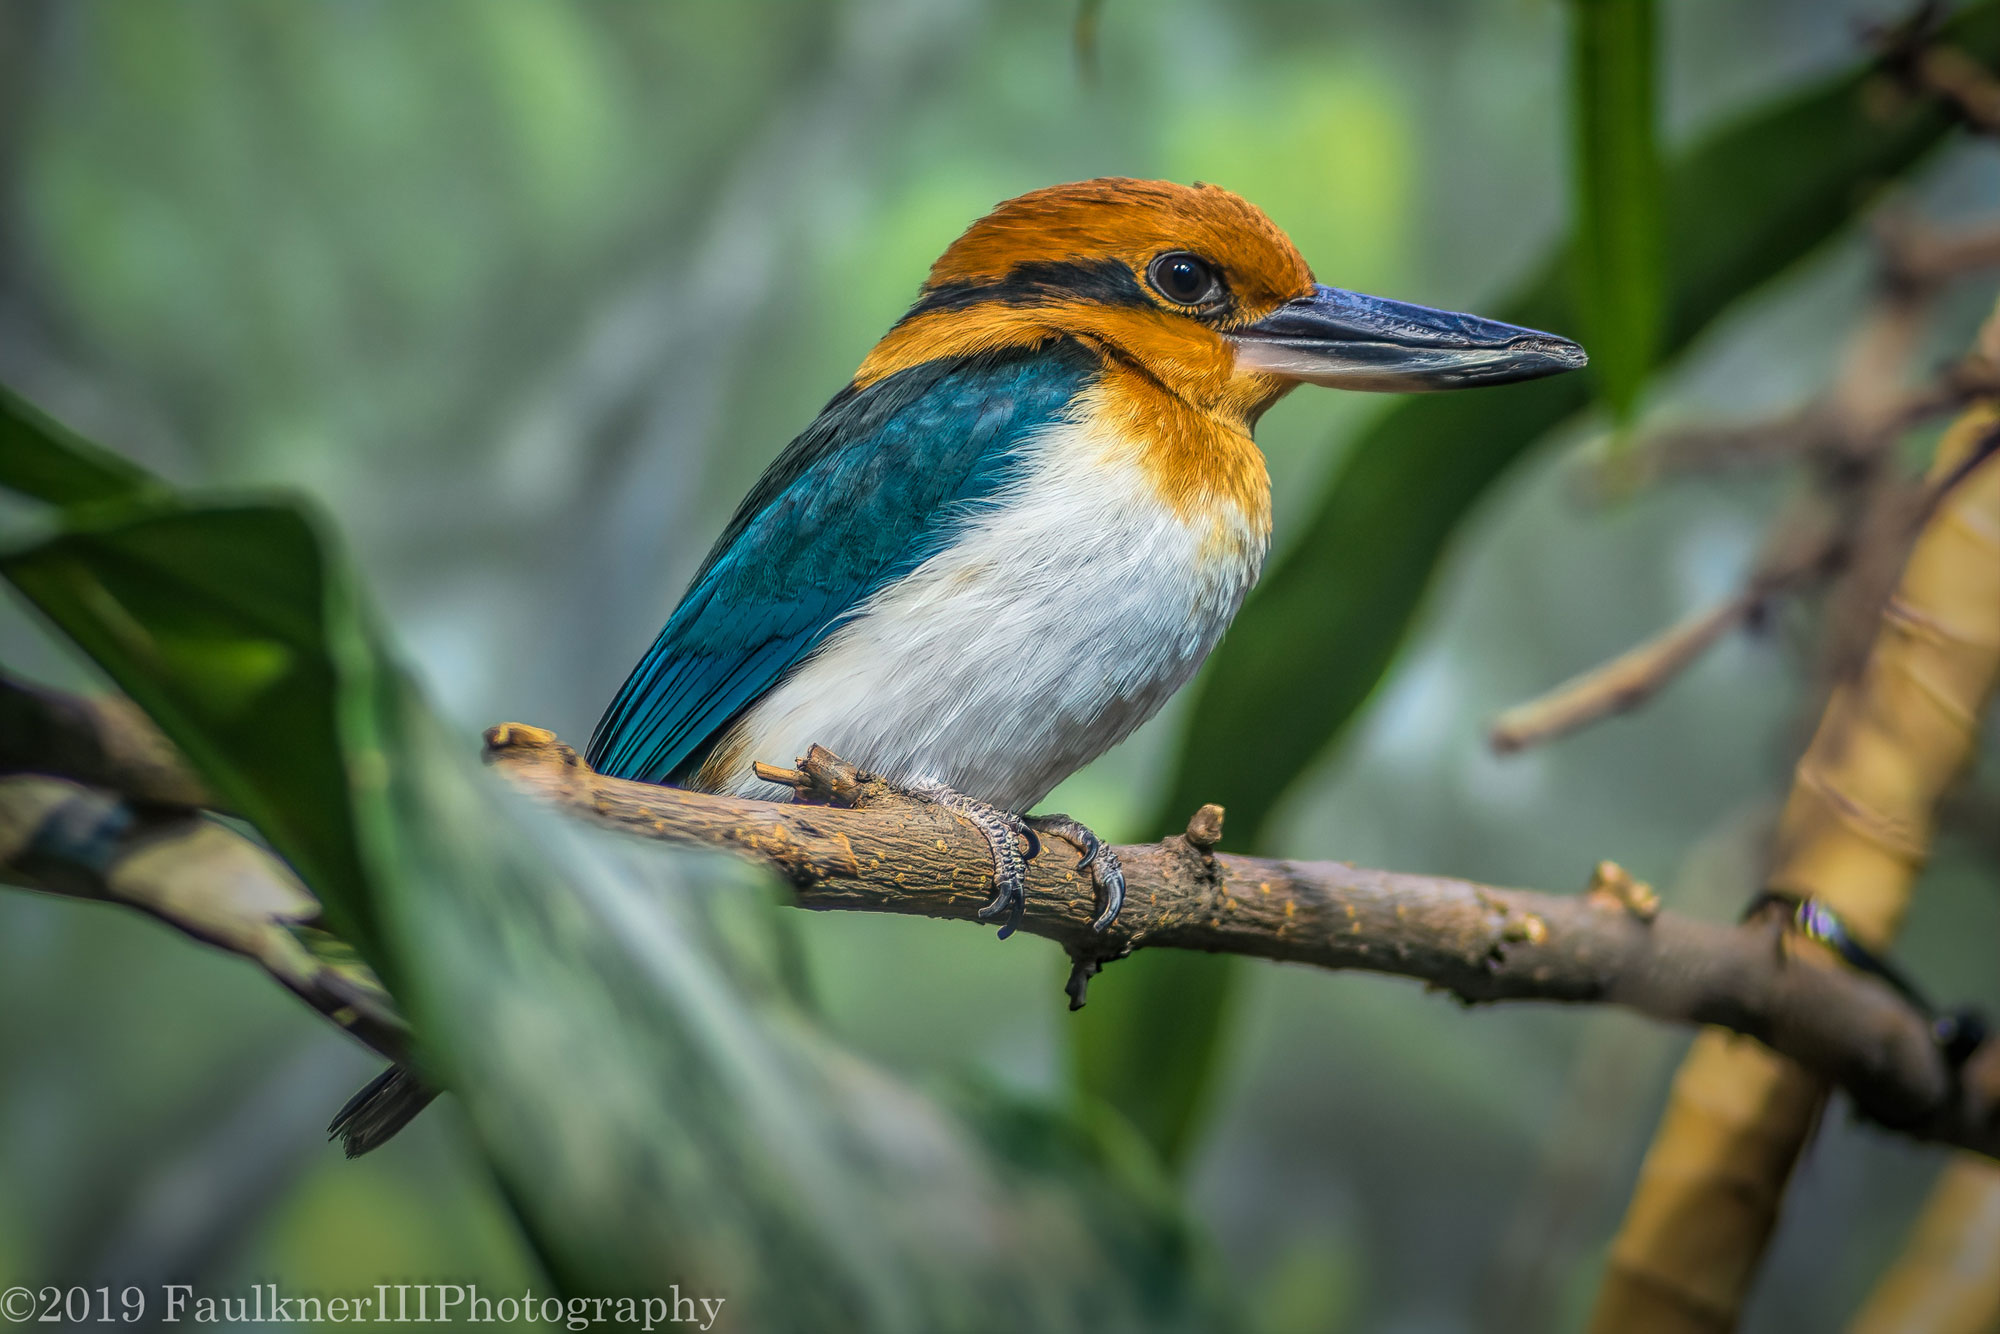 Photograph of a Guam kingfisher sitting on a branch. The photo shows a bird with a large head and a large black and orange beak. its lead is mostly orange with a black strip on the eye. Its breast is white and its back and wings are blue.